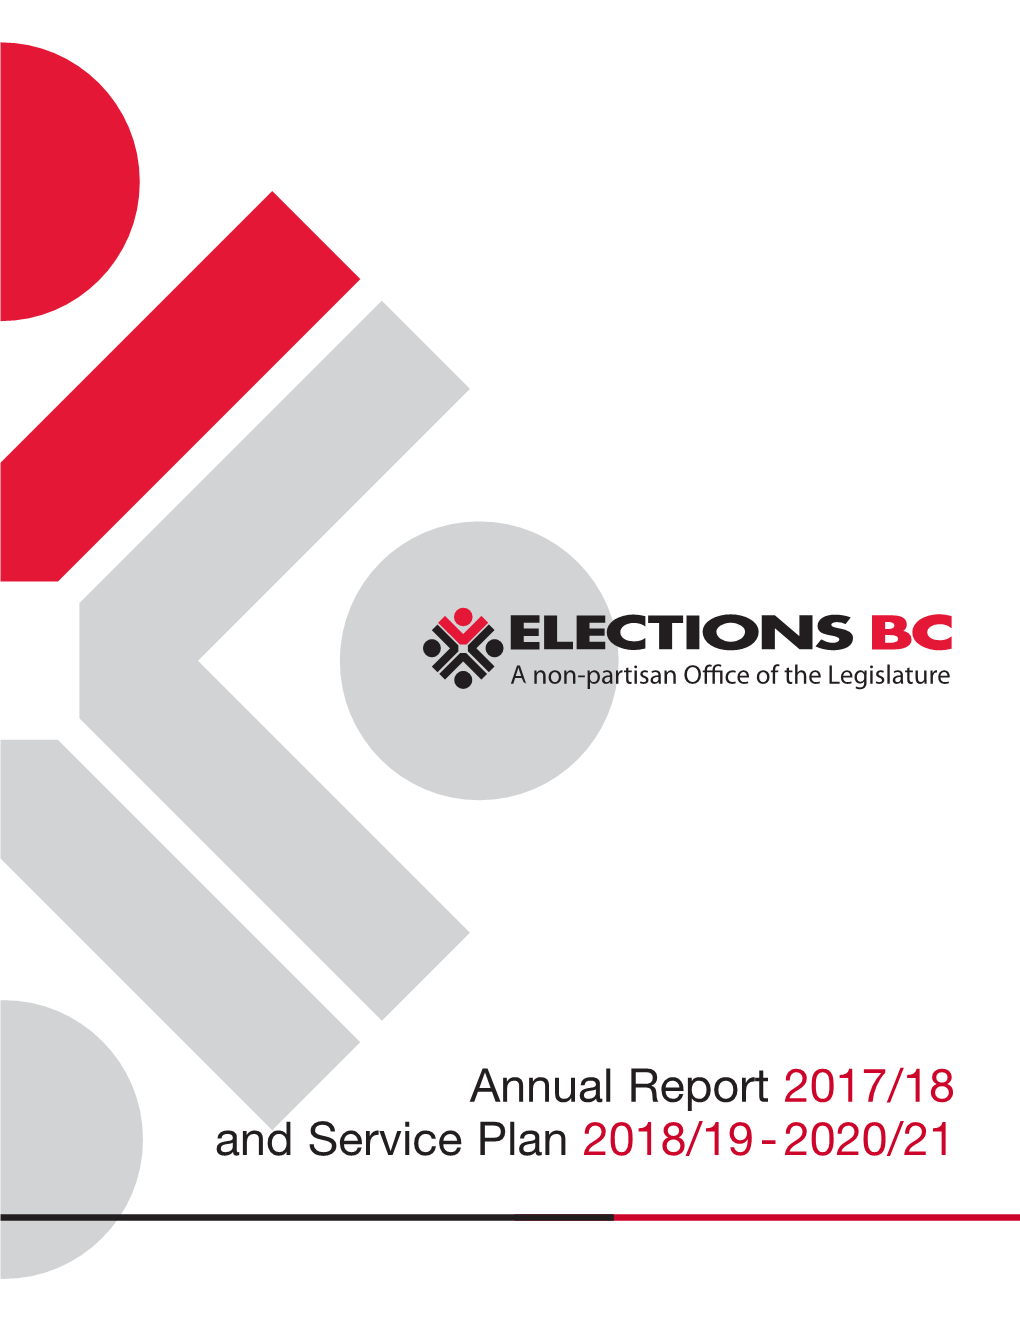 Elections BC Annual Report 2017/18 and Service Plan 2018/19 - 2020/21